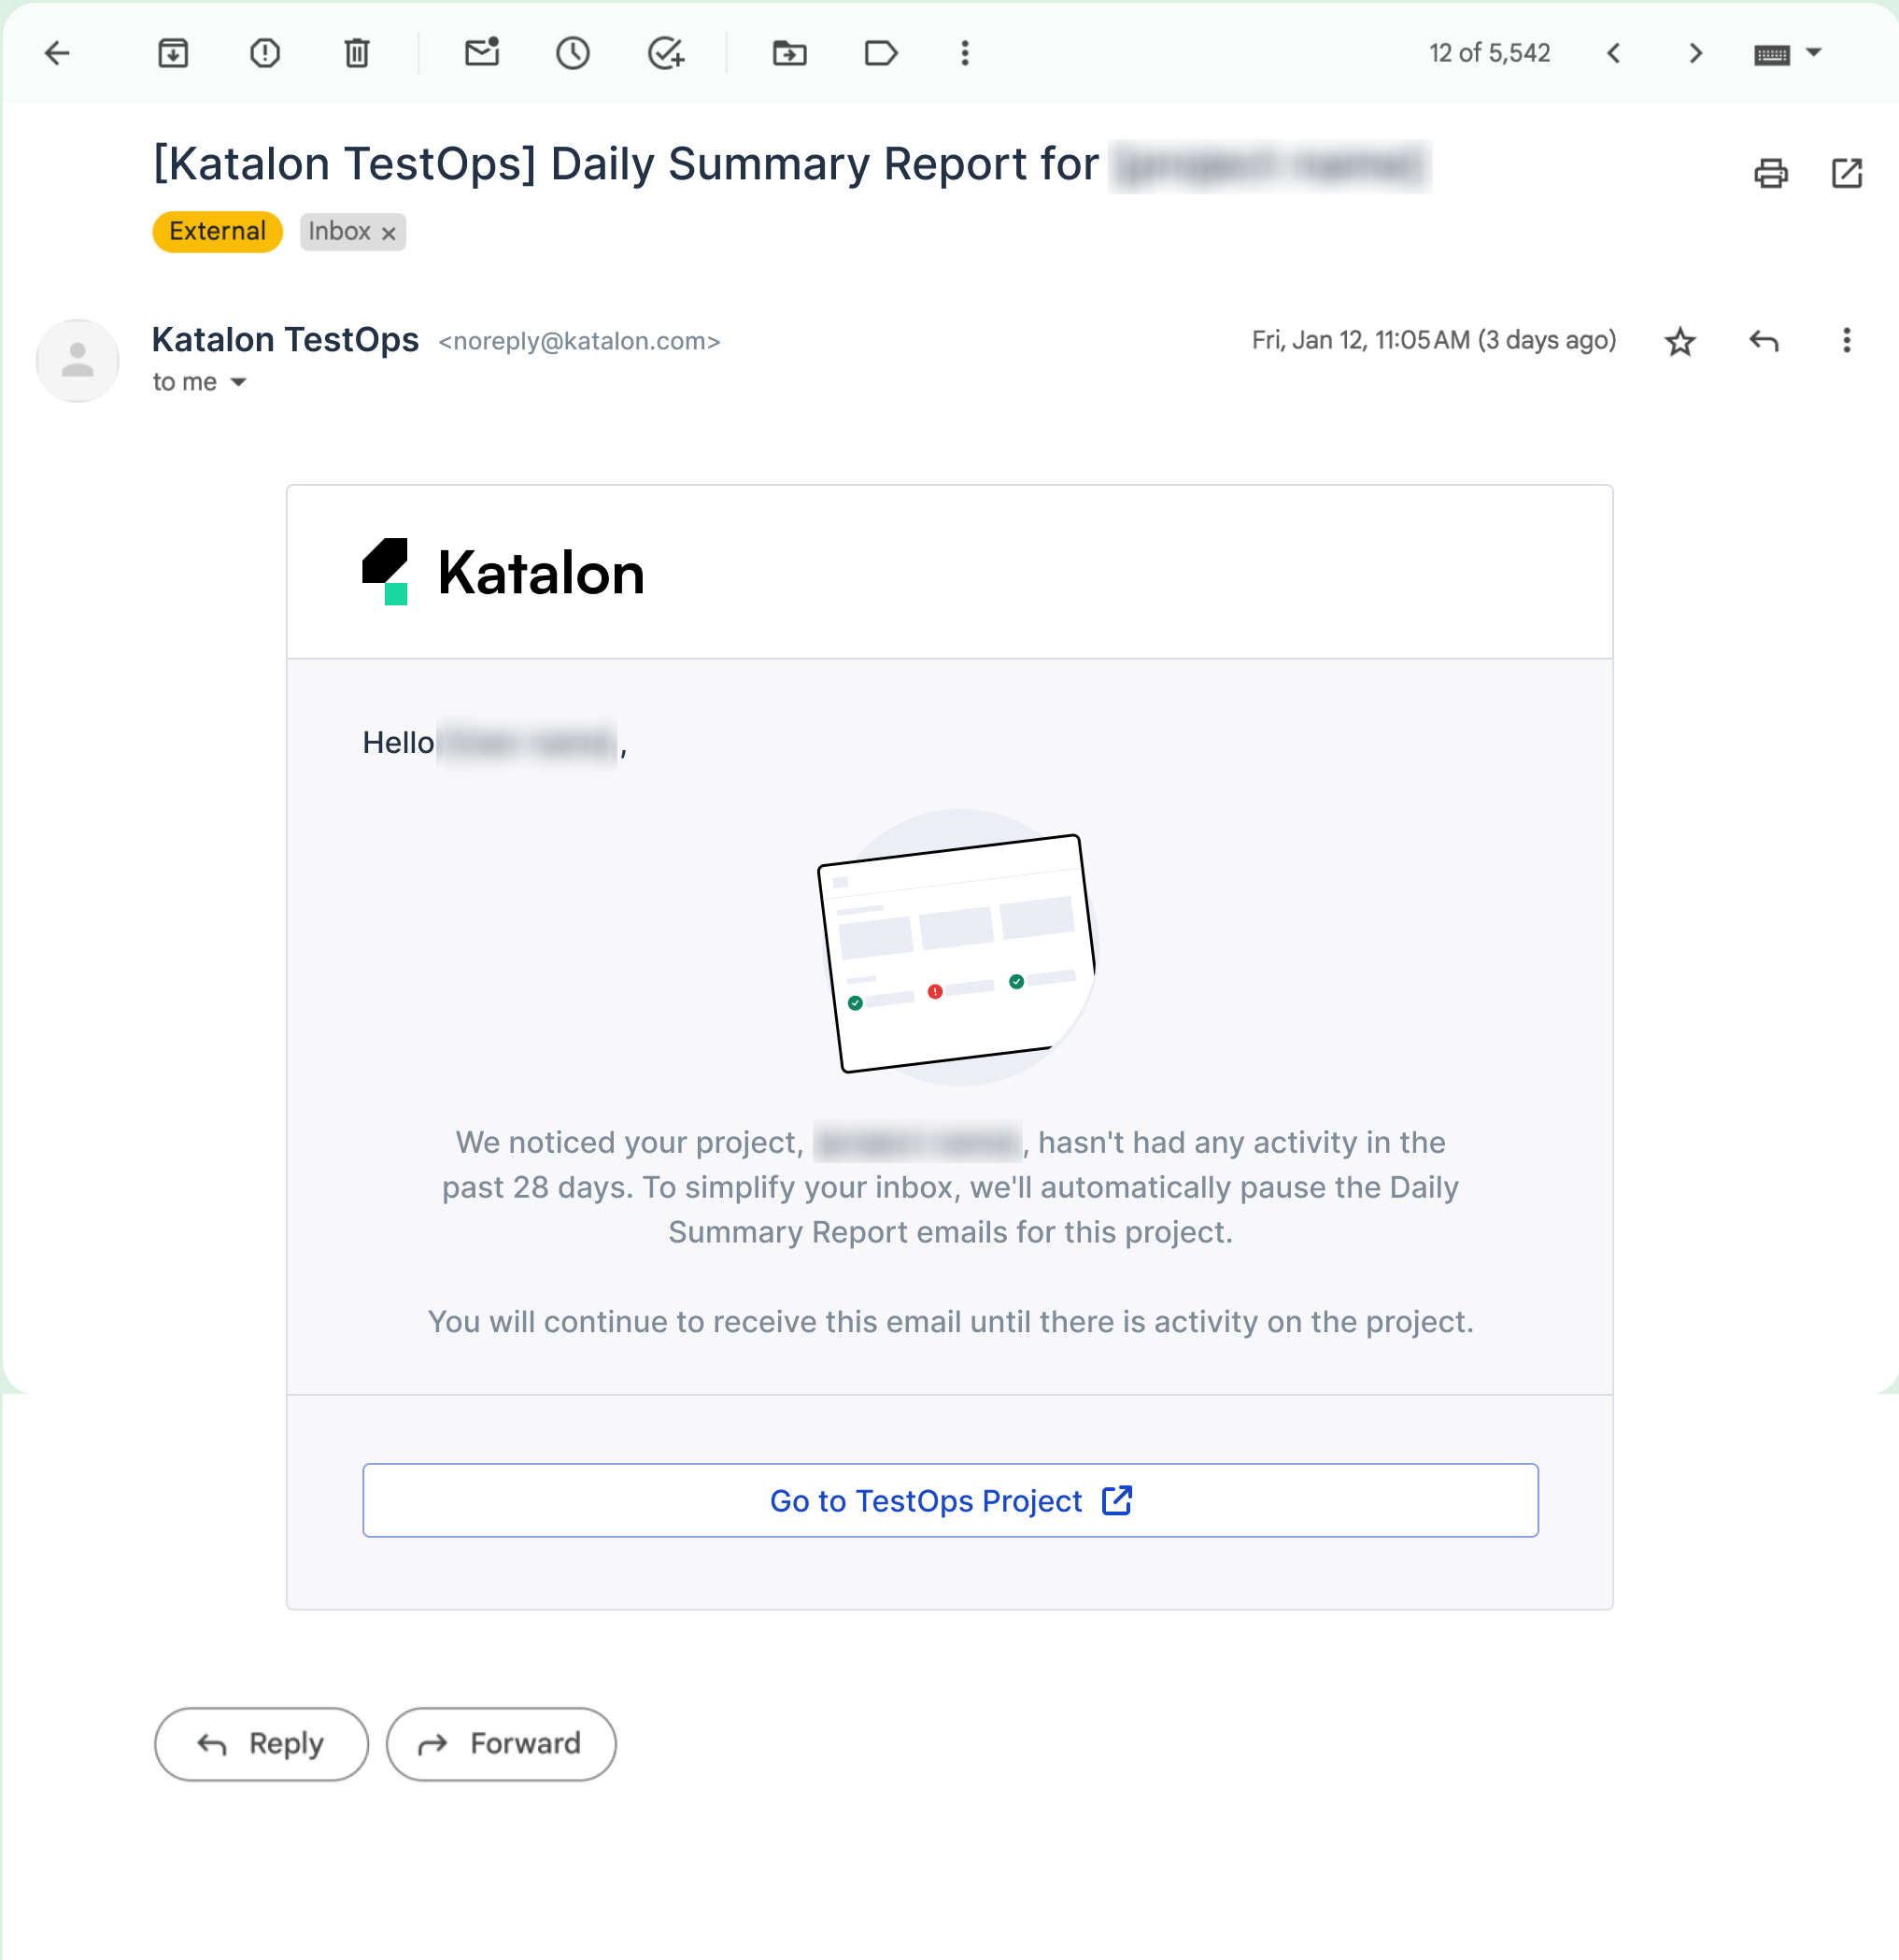 An email confirming that daily summary report has been disabled due to inactivity.